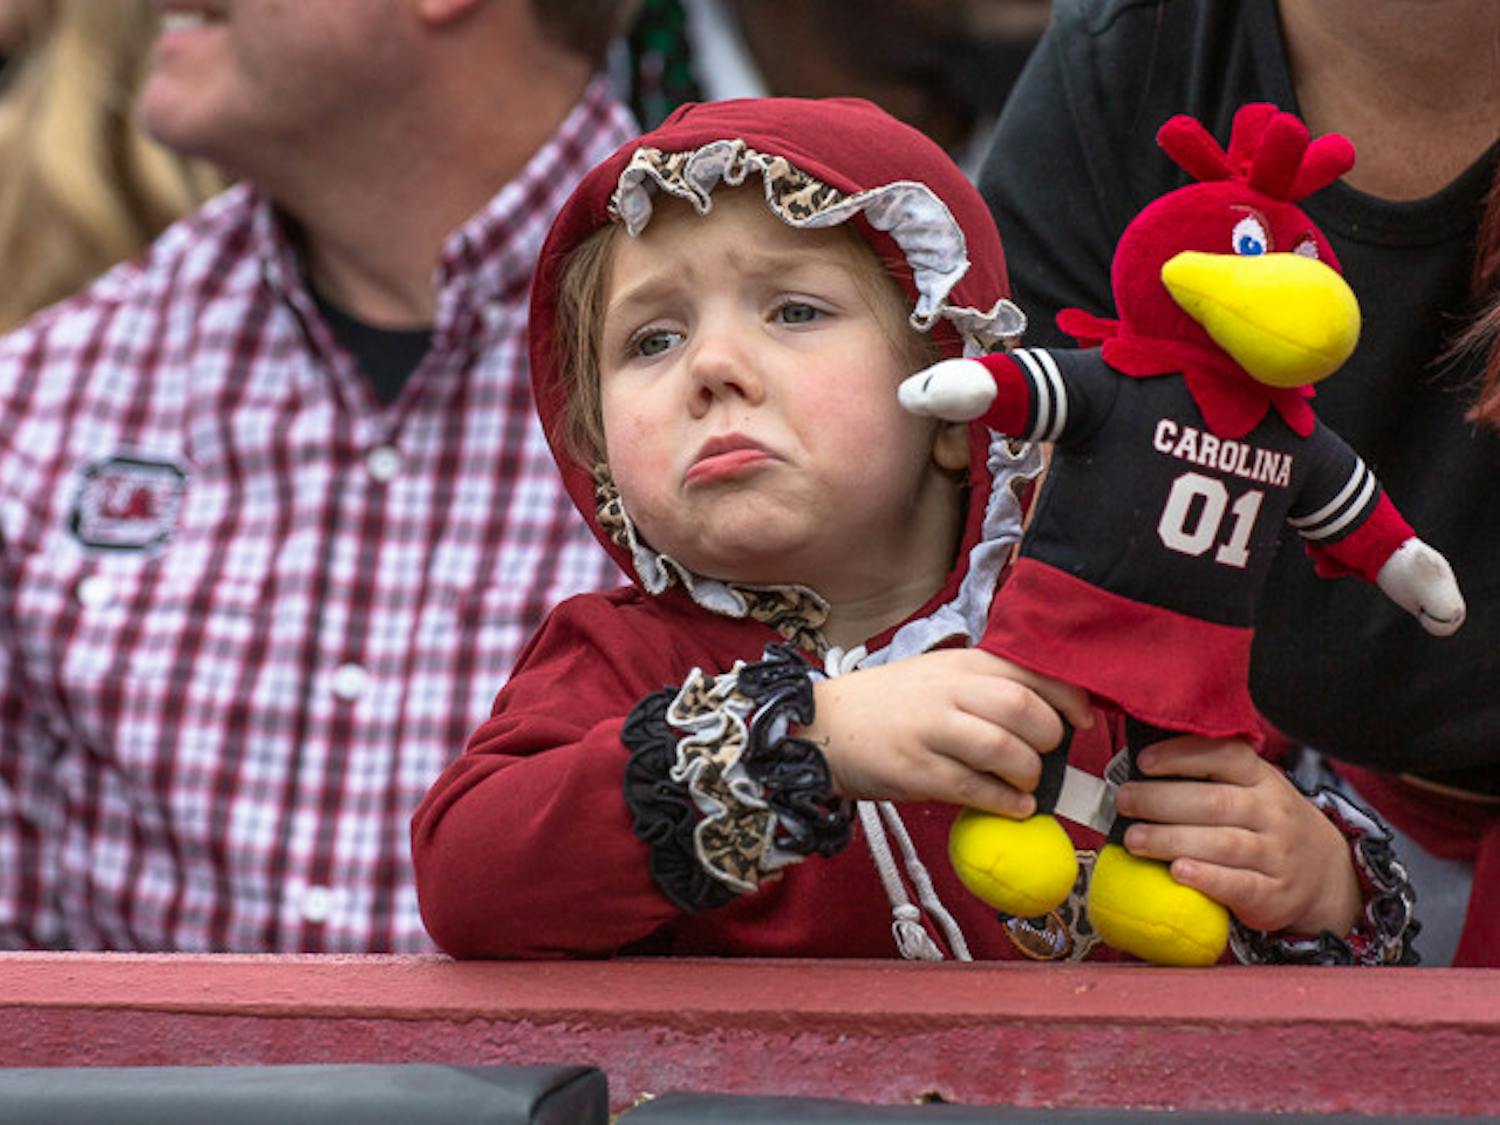 A girl dressed in her Halloween costume, holding a Cocky doll pouts after a play during the South Carolina and Missouri game on Oct. 29, 2022. The game fell on the weekend of Halloween, prompting many students and fans to dawn their costumes for the event.